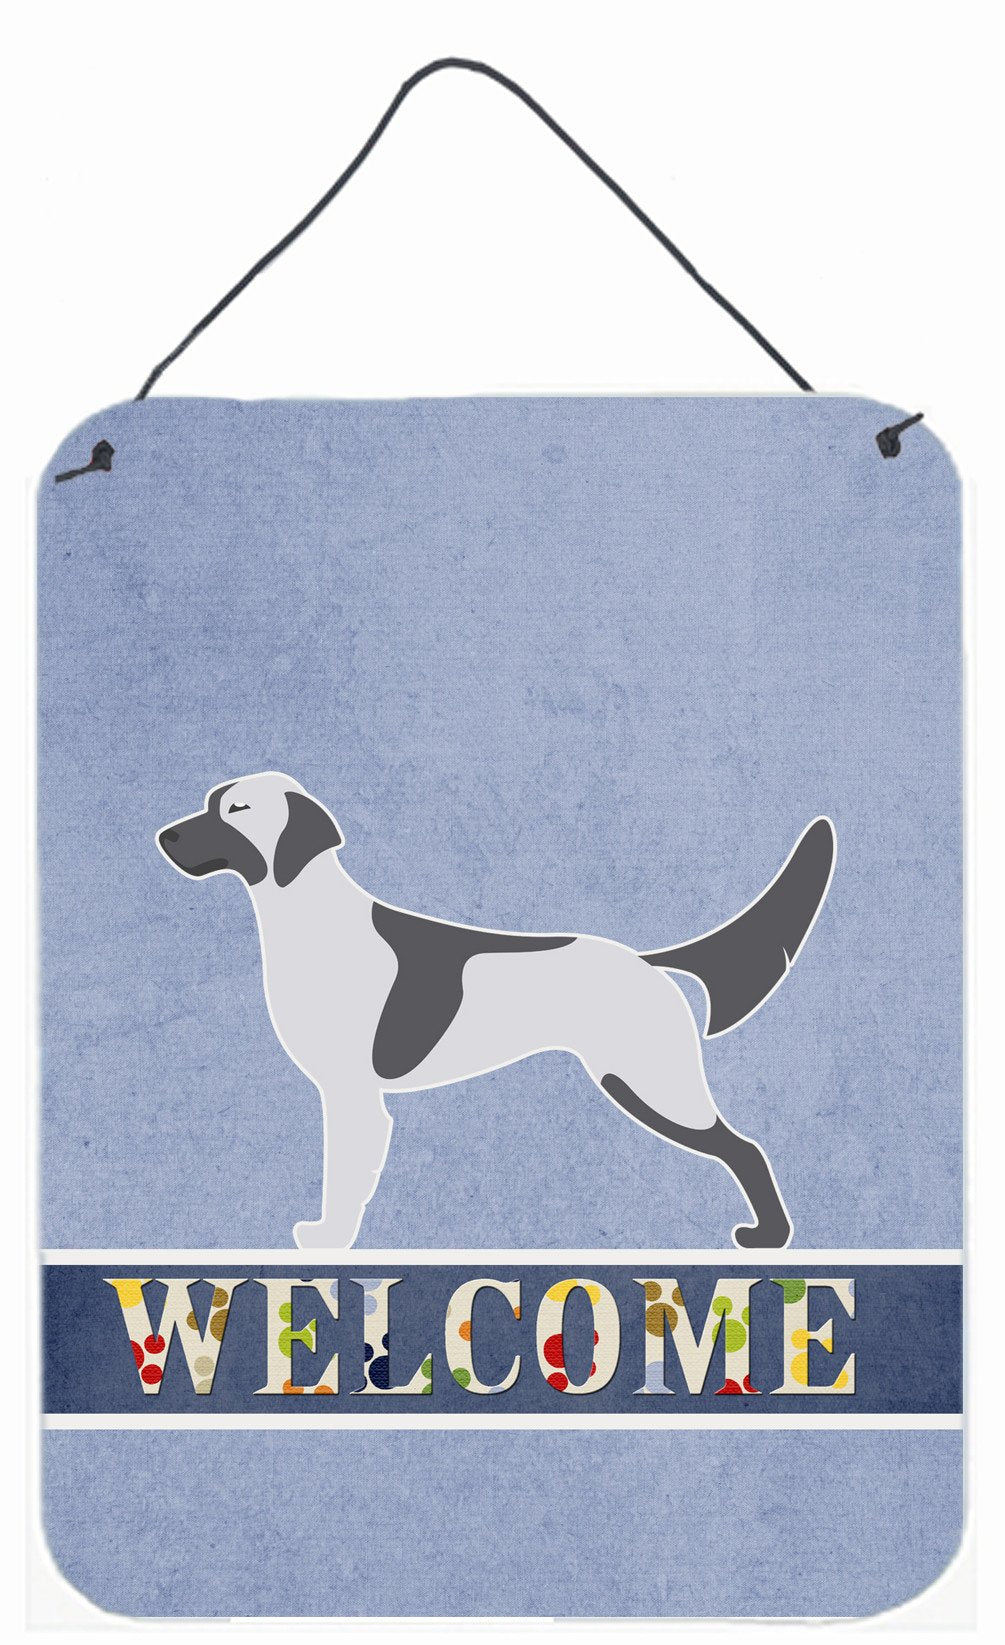 English Setter Welcome Wall or Door Hanging Prints BB5485DS1216 by Caroline's Treasures